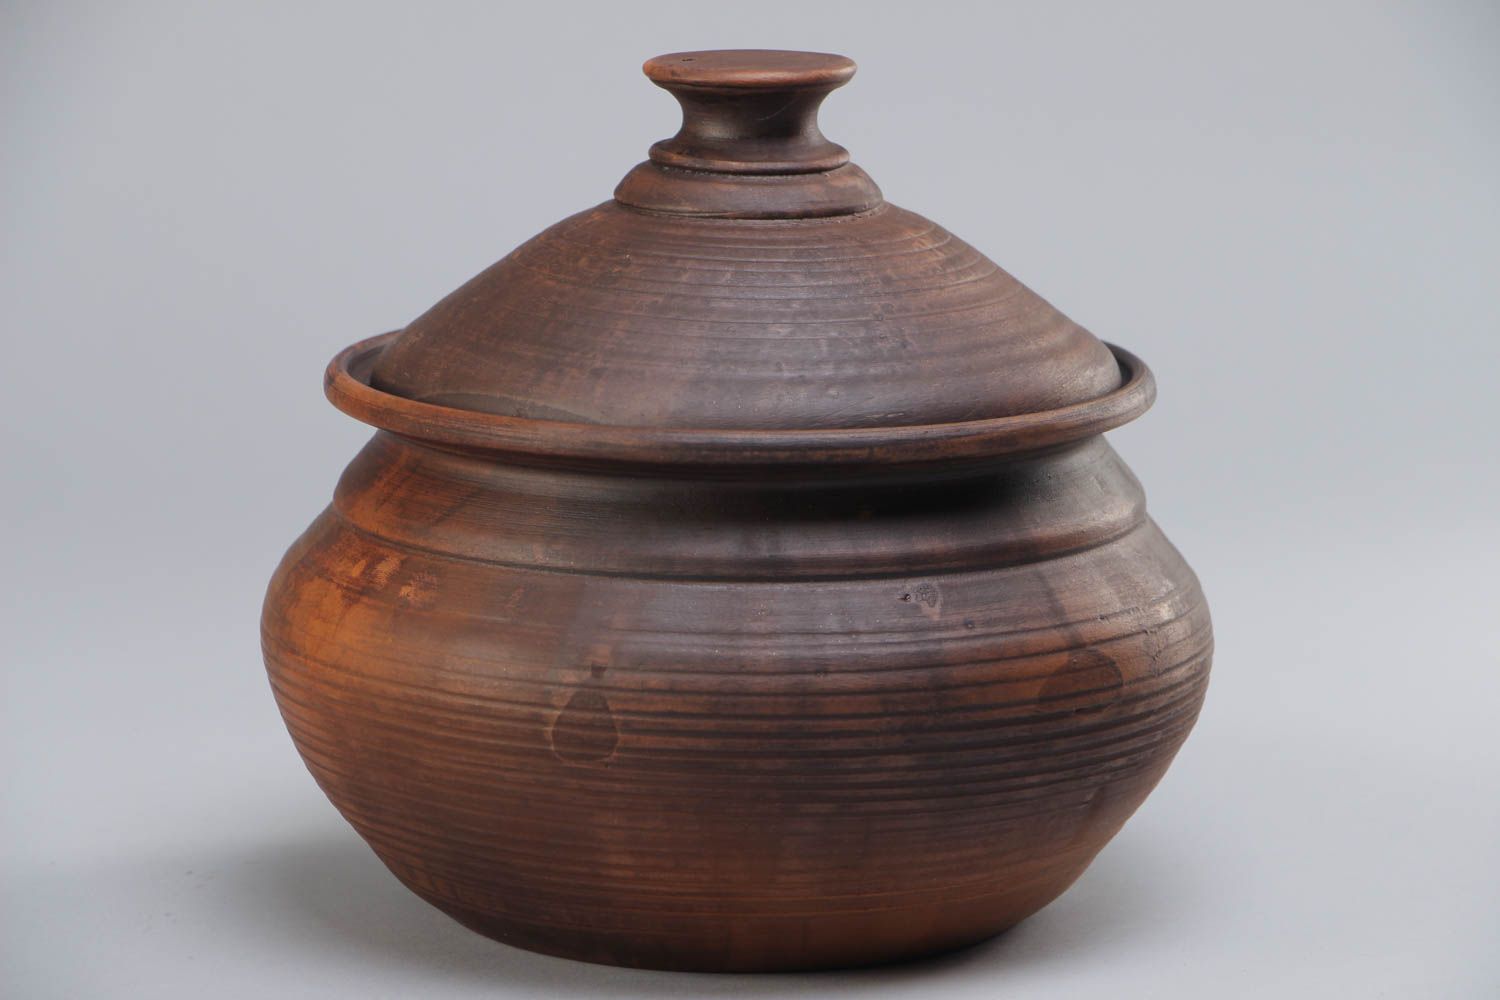 Handmade dark brown ceramic pot with lid for baking kilned with the use of milk photo 2